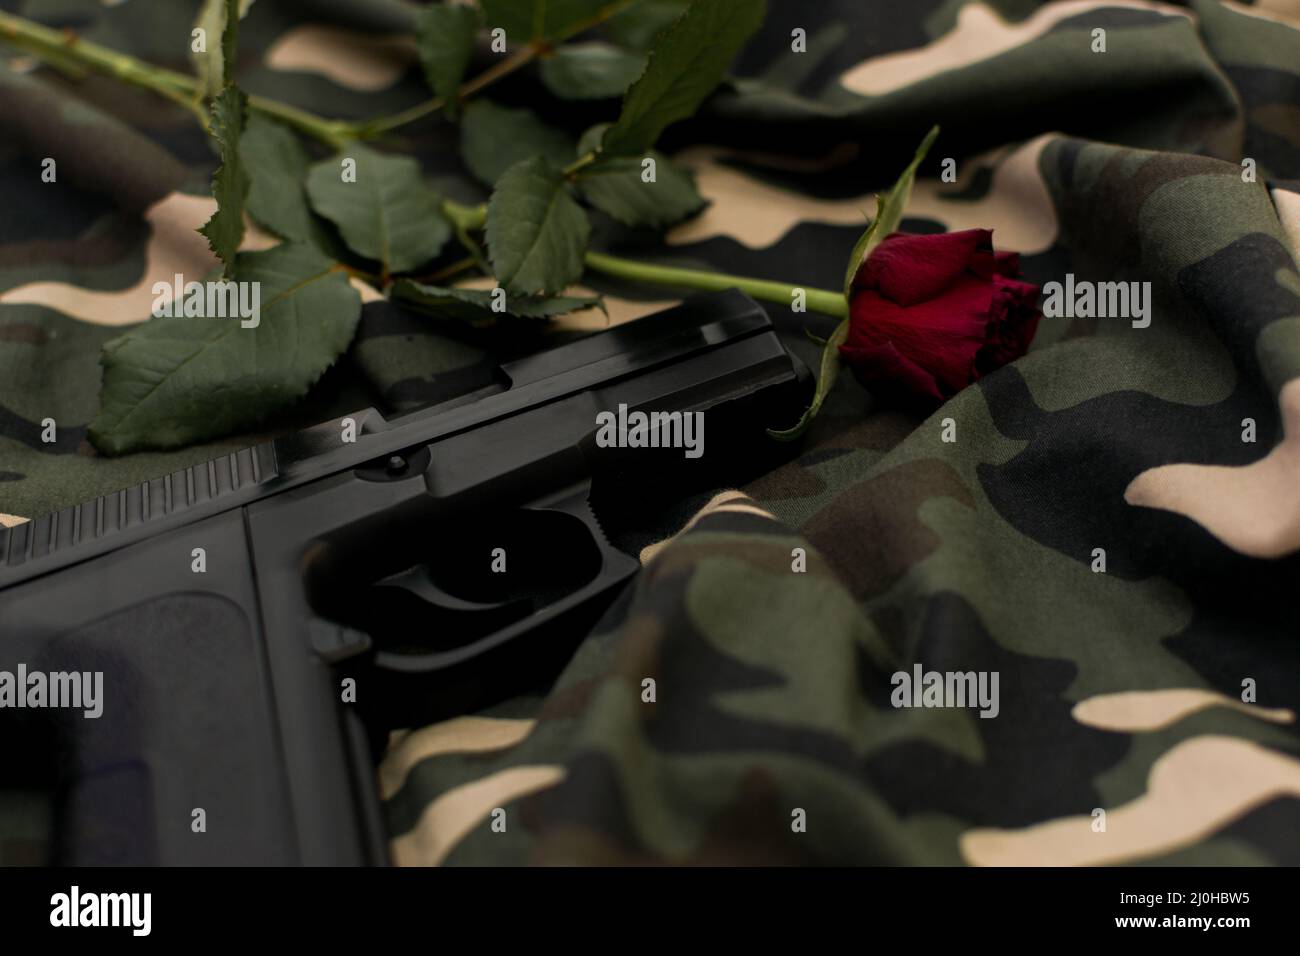 Red rose and black handgun on military camouflage uniform background Stock Photo